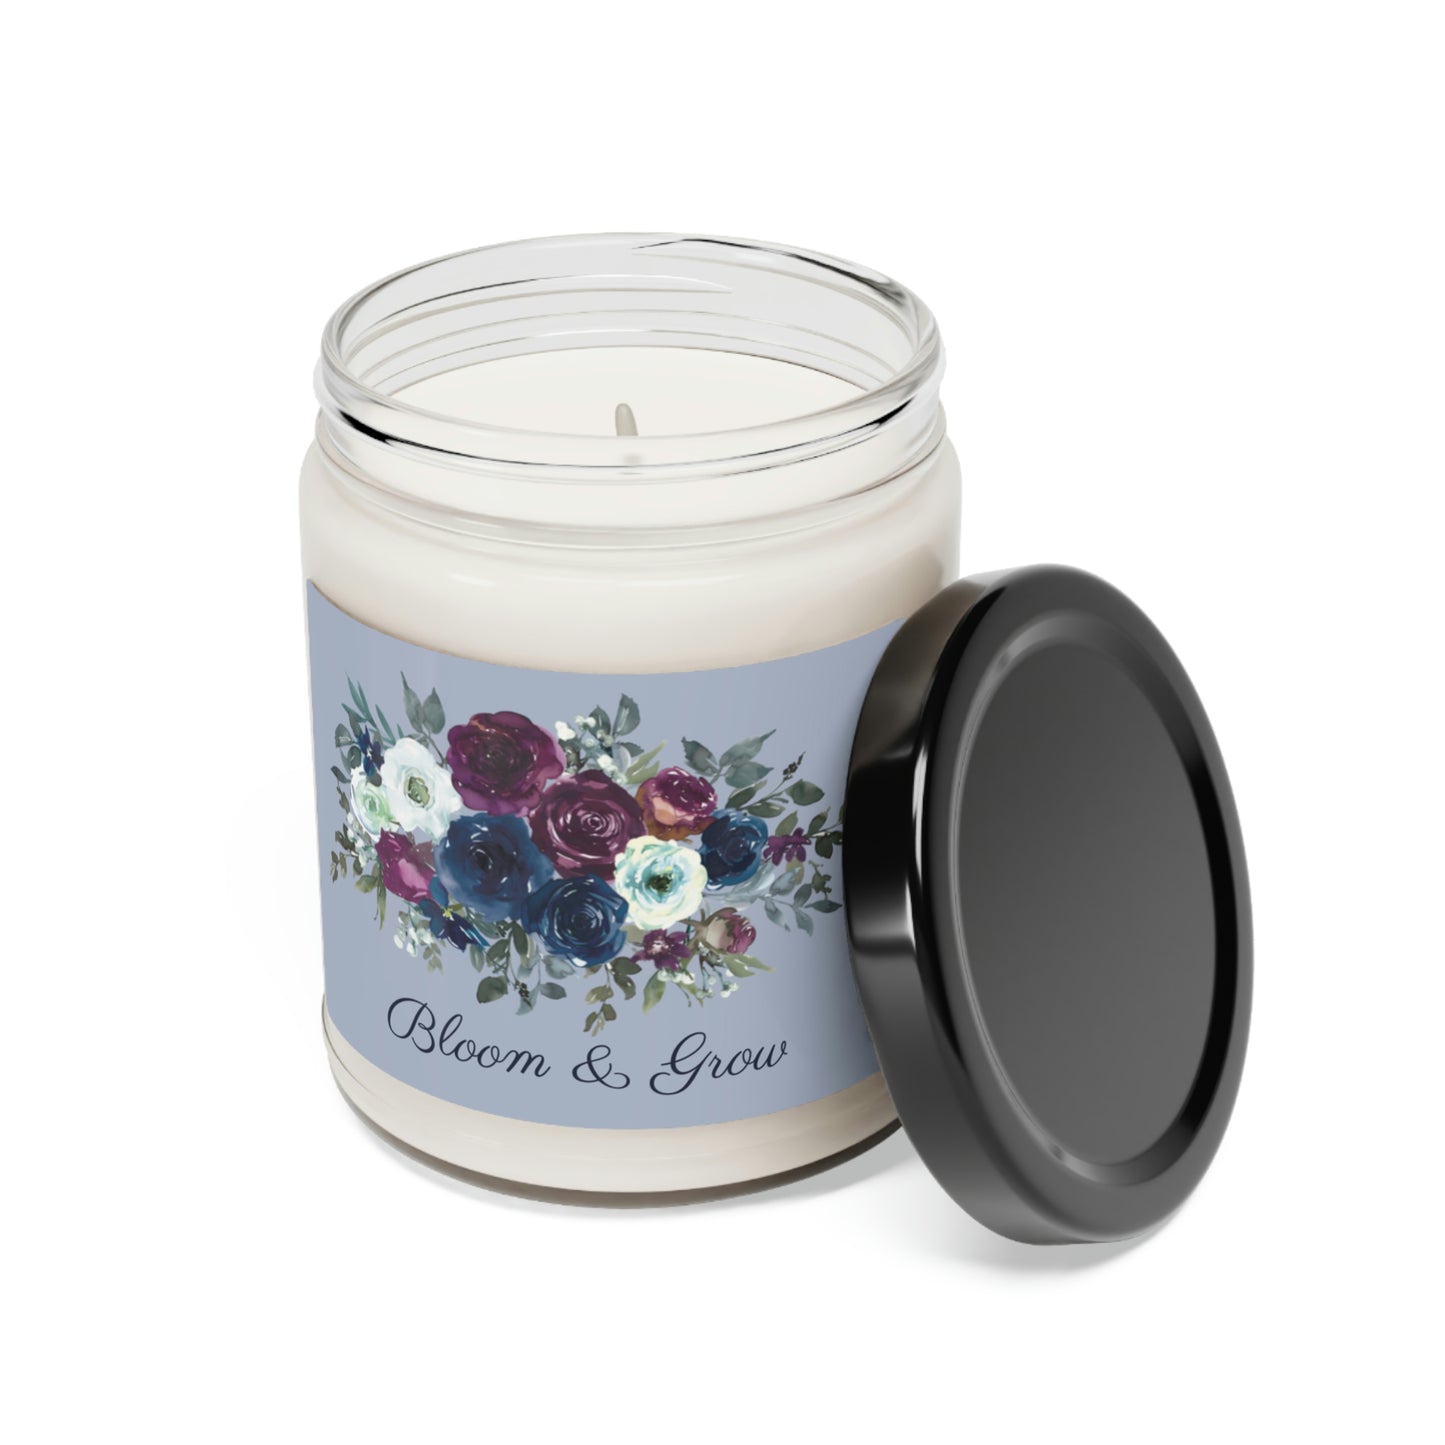 Bloom & Grow Scented Soy Candle, 9oz